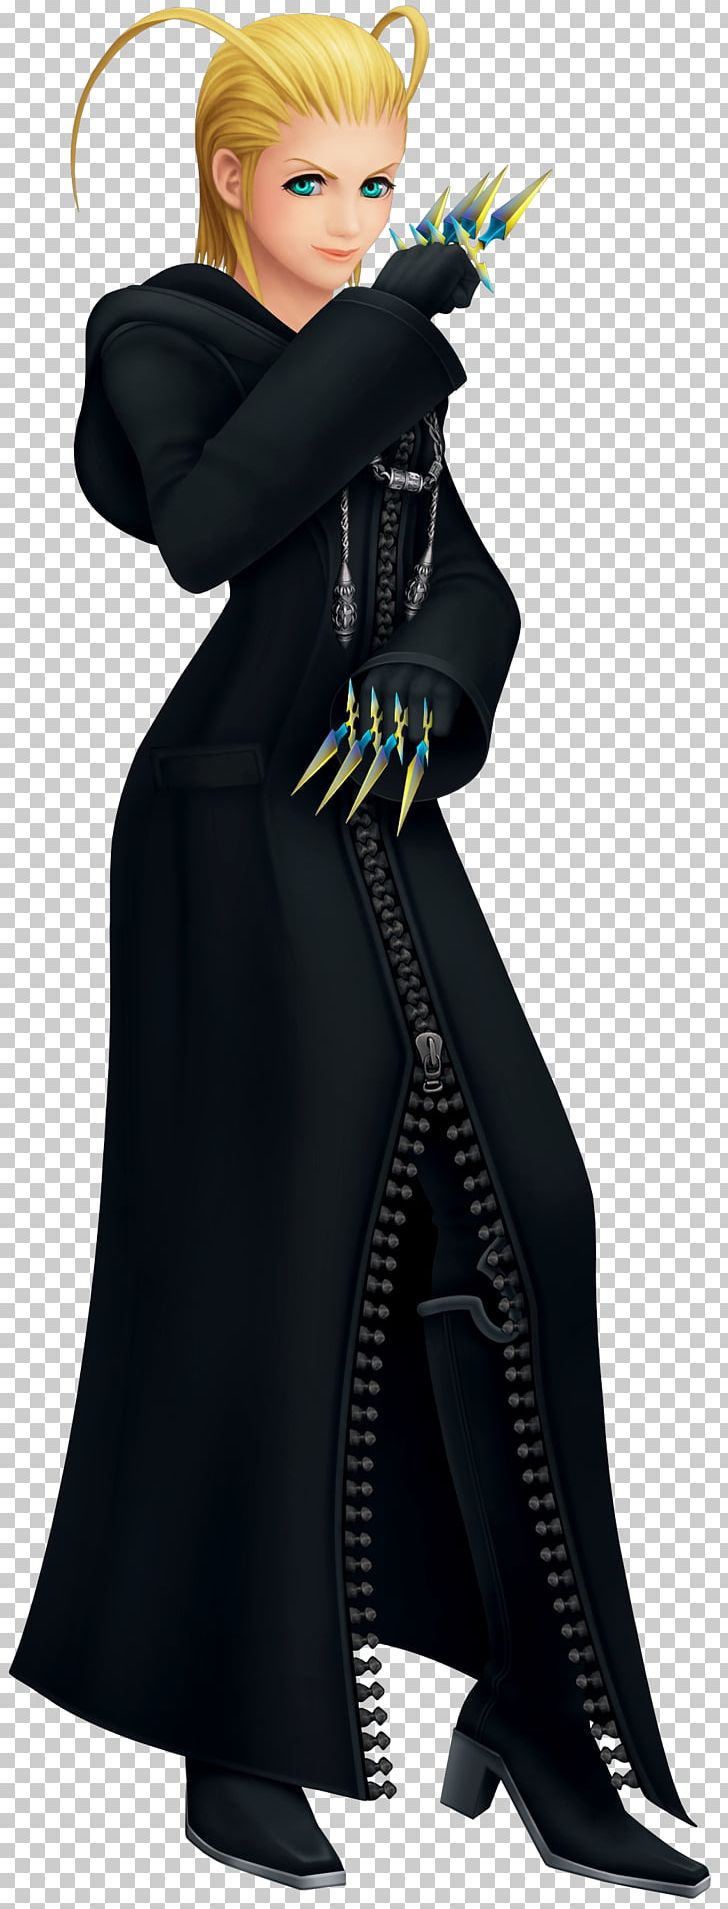 Shanelle Workman Kingdom Hearts: Chain Of Memories Kingdom Hearts II Kingdom Hearts 358/2 Days Organization XIII PNG, Clipart, Boss, Castle Oblivion, Characters Of Kingdom Hearts, Costume, Costume Design Free PNG Download